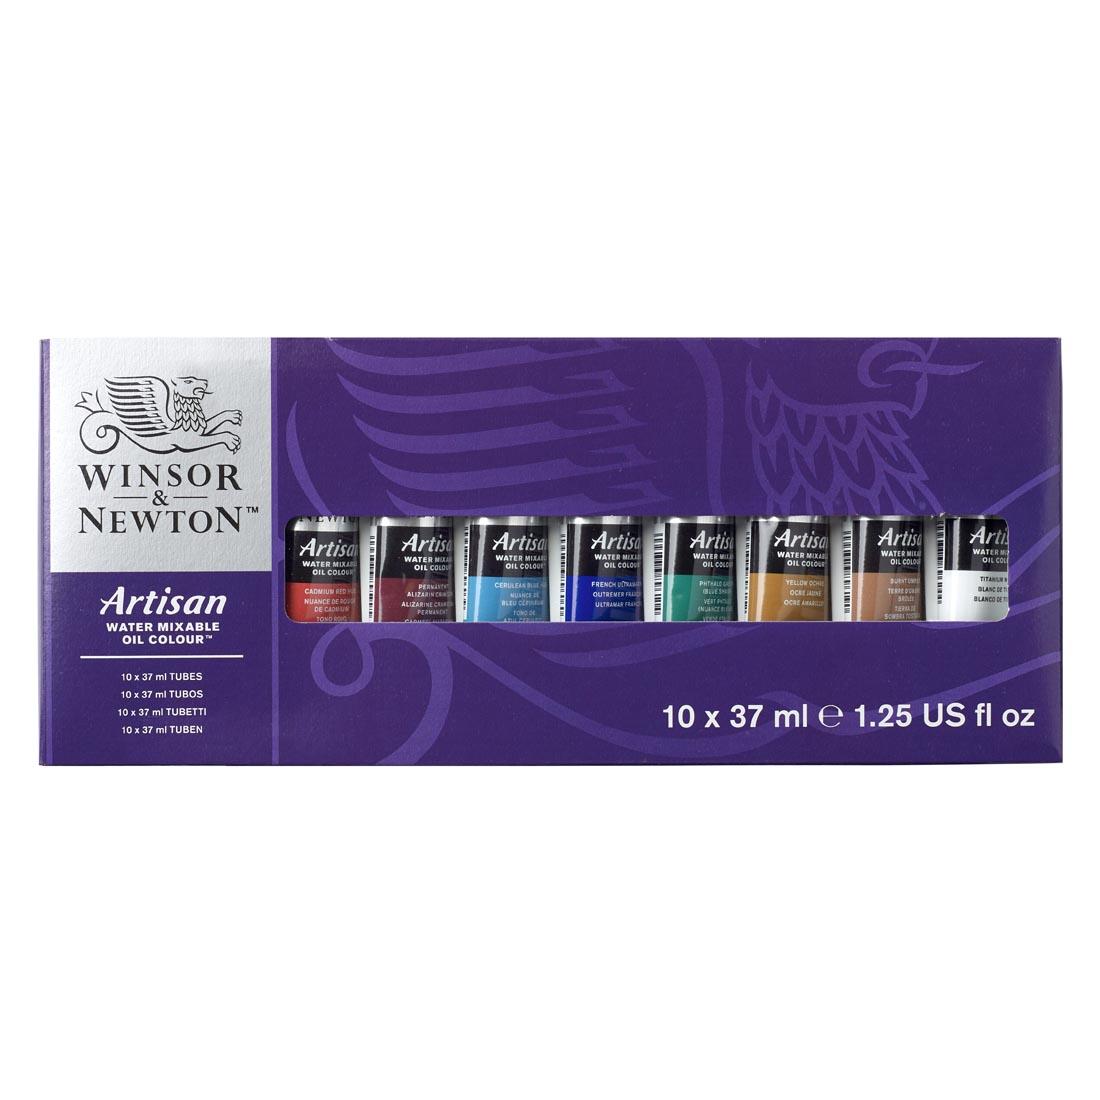 Winsor and Newton Artisan Water Mixable Oil Colours Large Tube Set, 10 colors, 37ml each